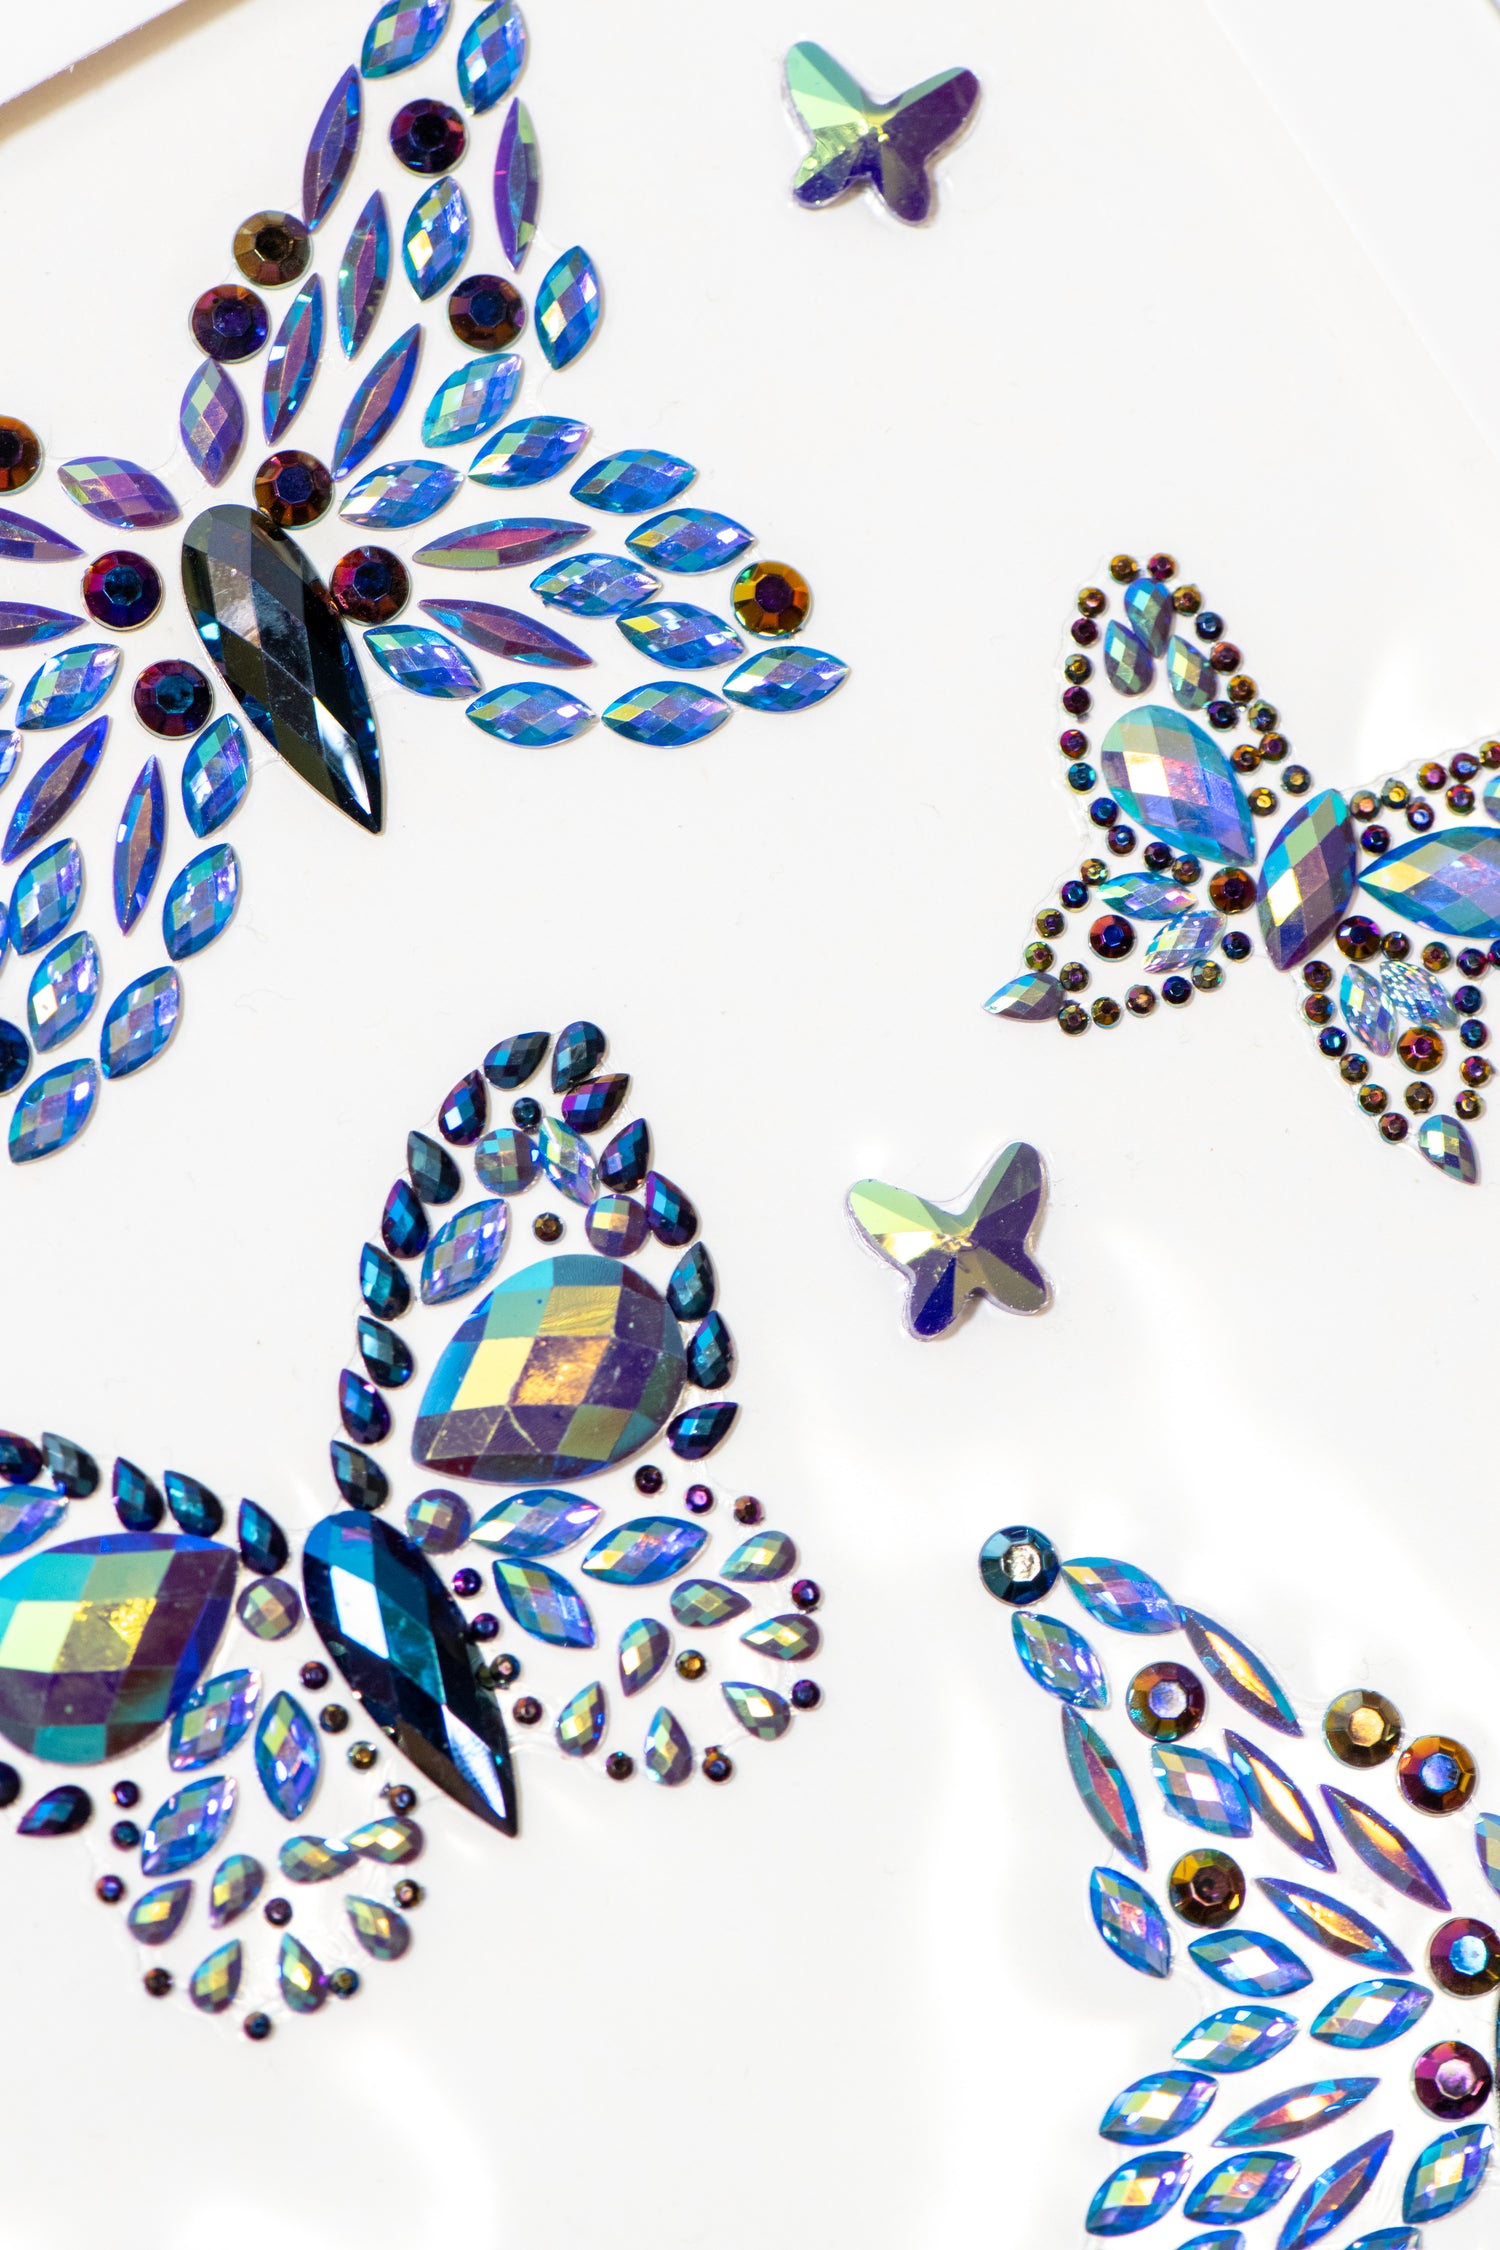 Wicked Wings Butterfly Body Jewel Mix Pack - Lunautics Jewel Mix Pack